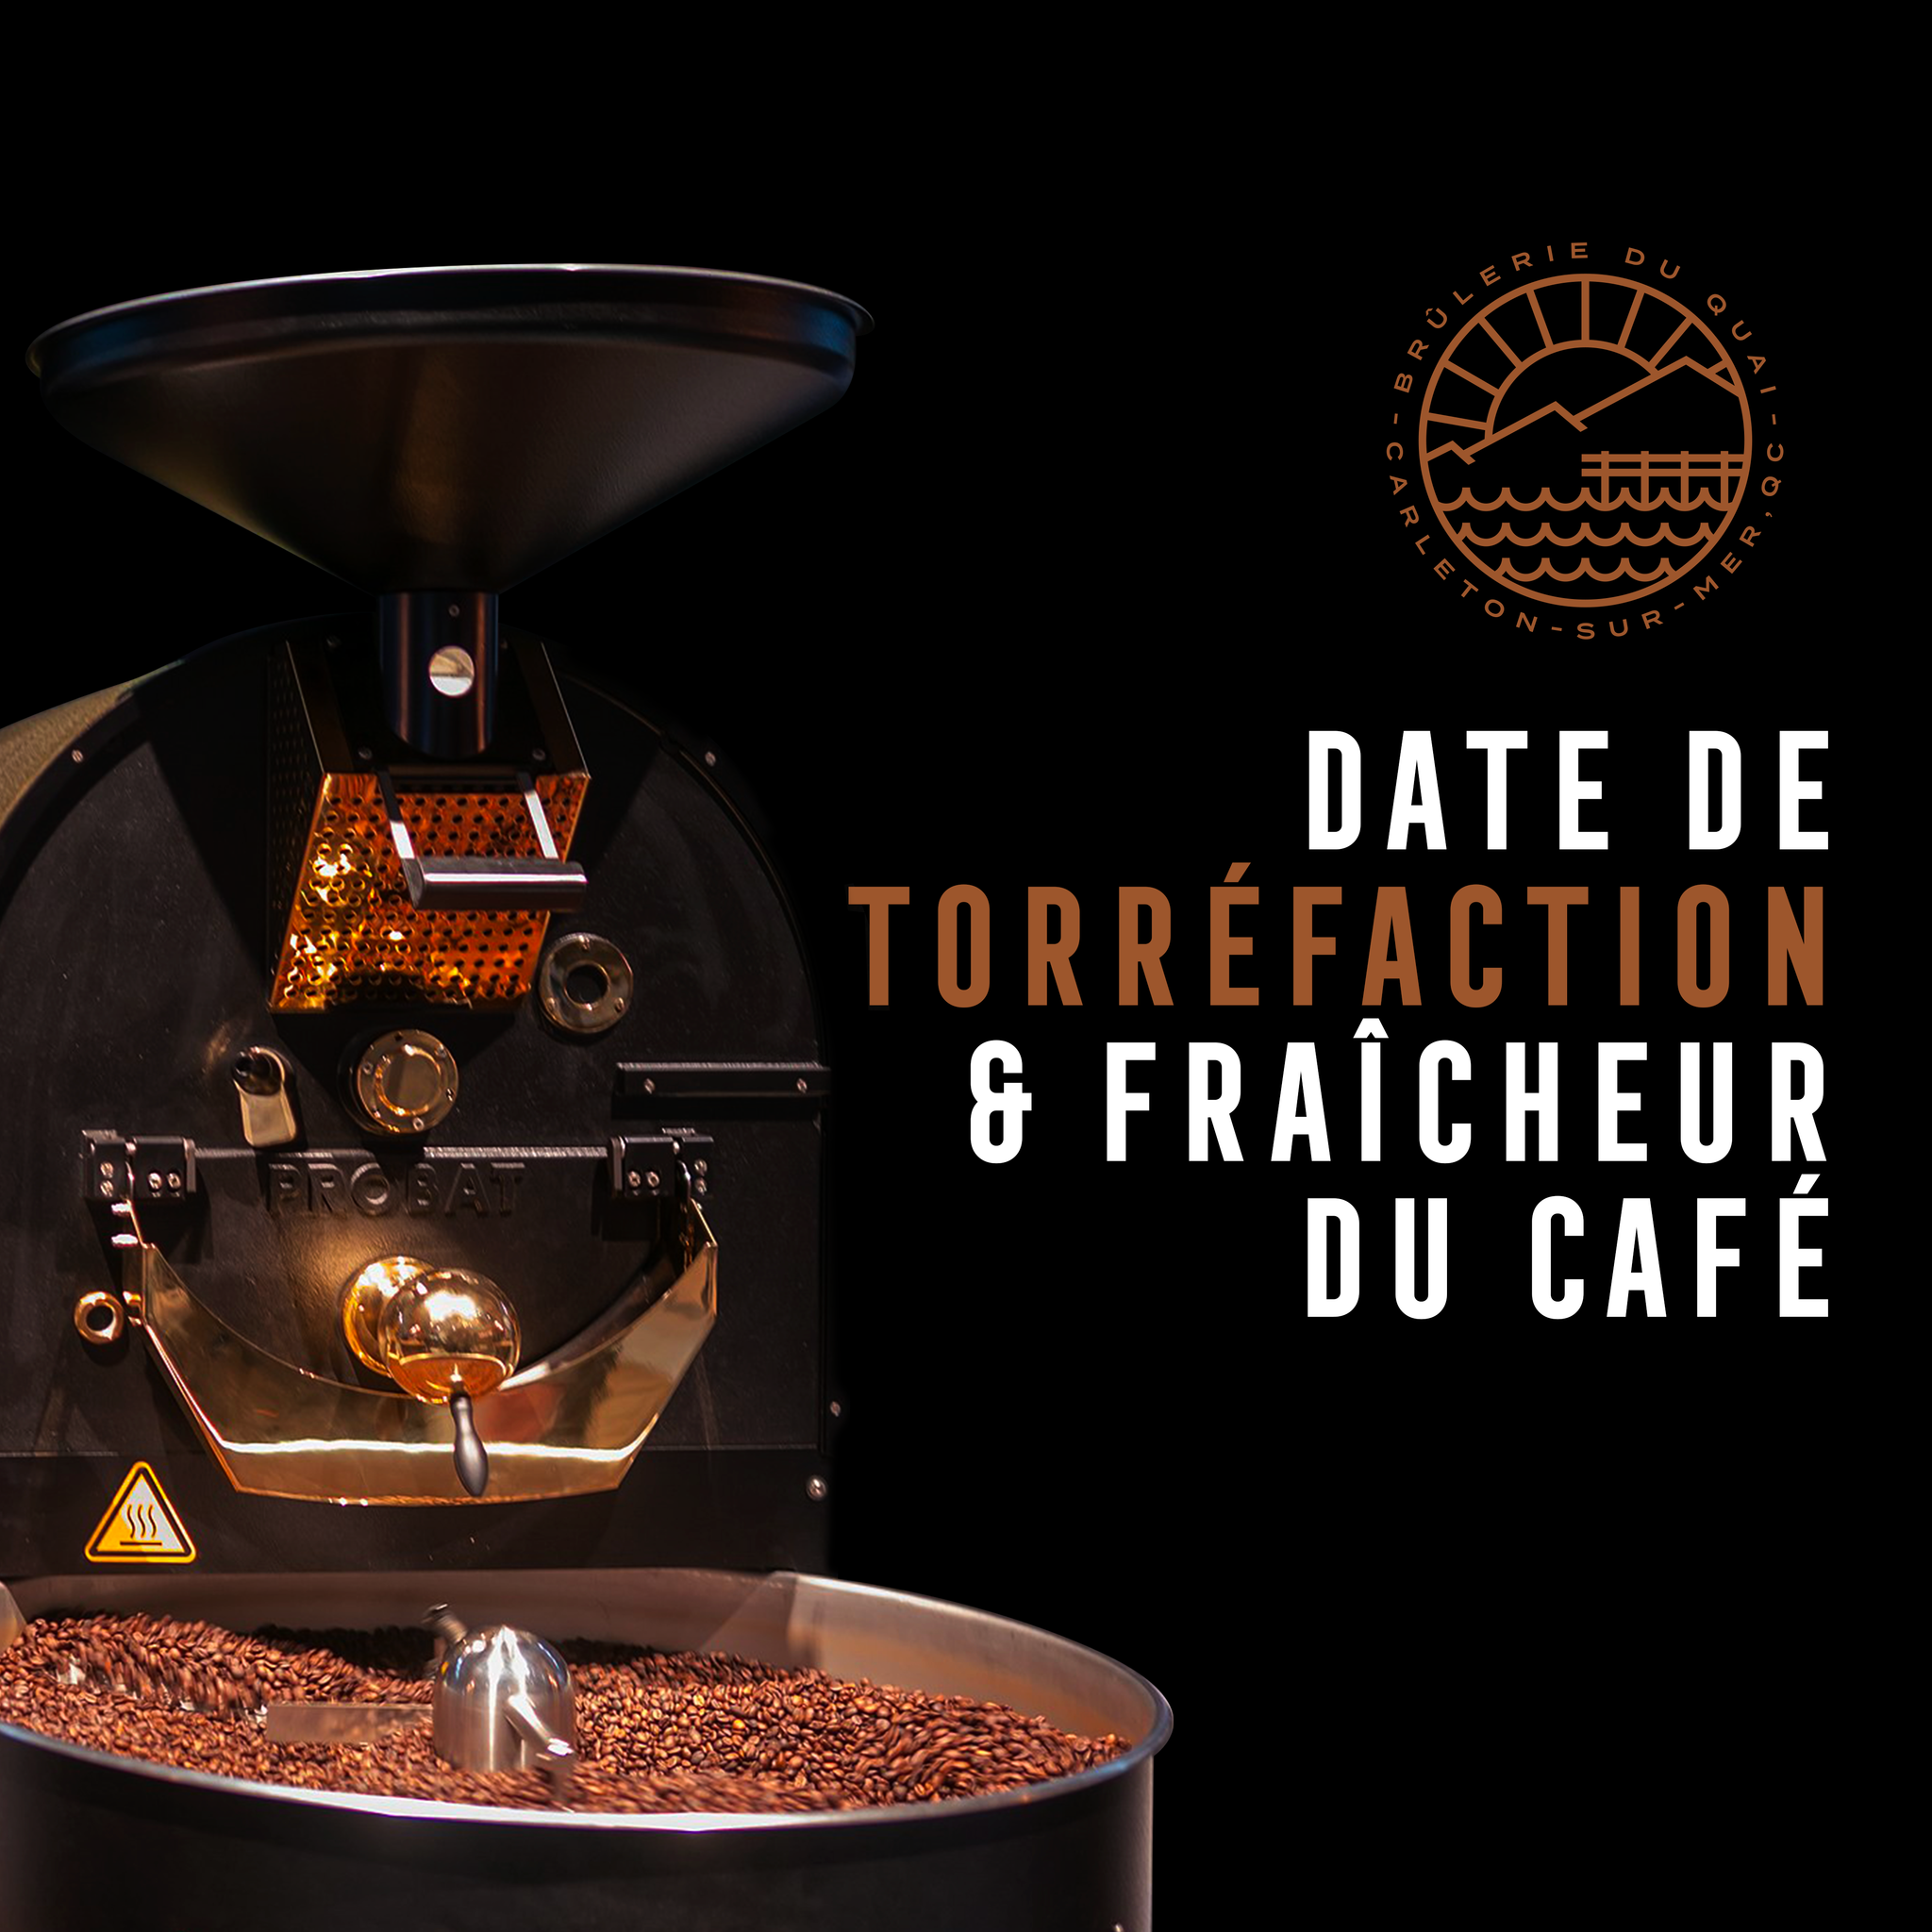 Roasting date and coffee freshness